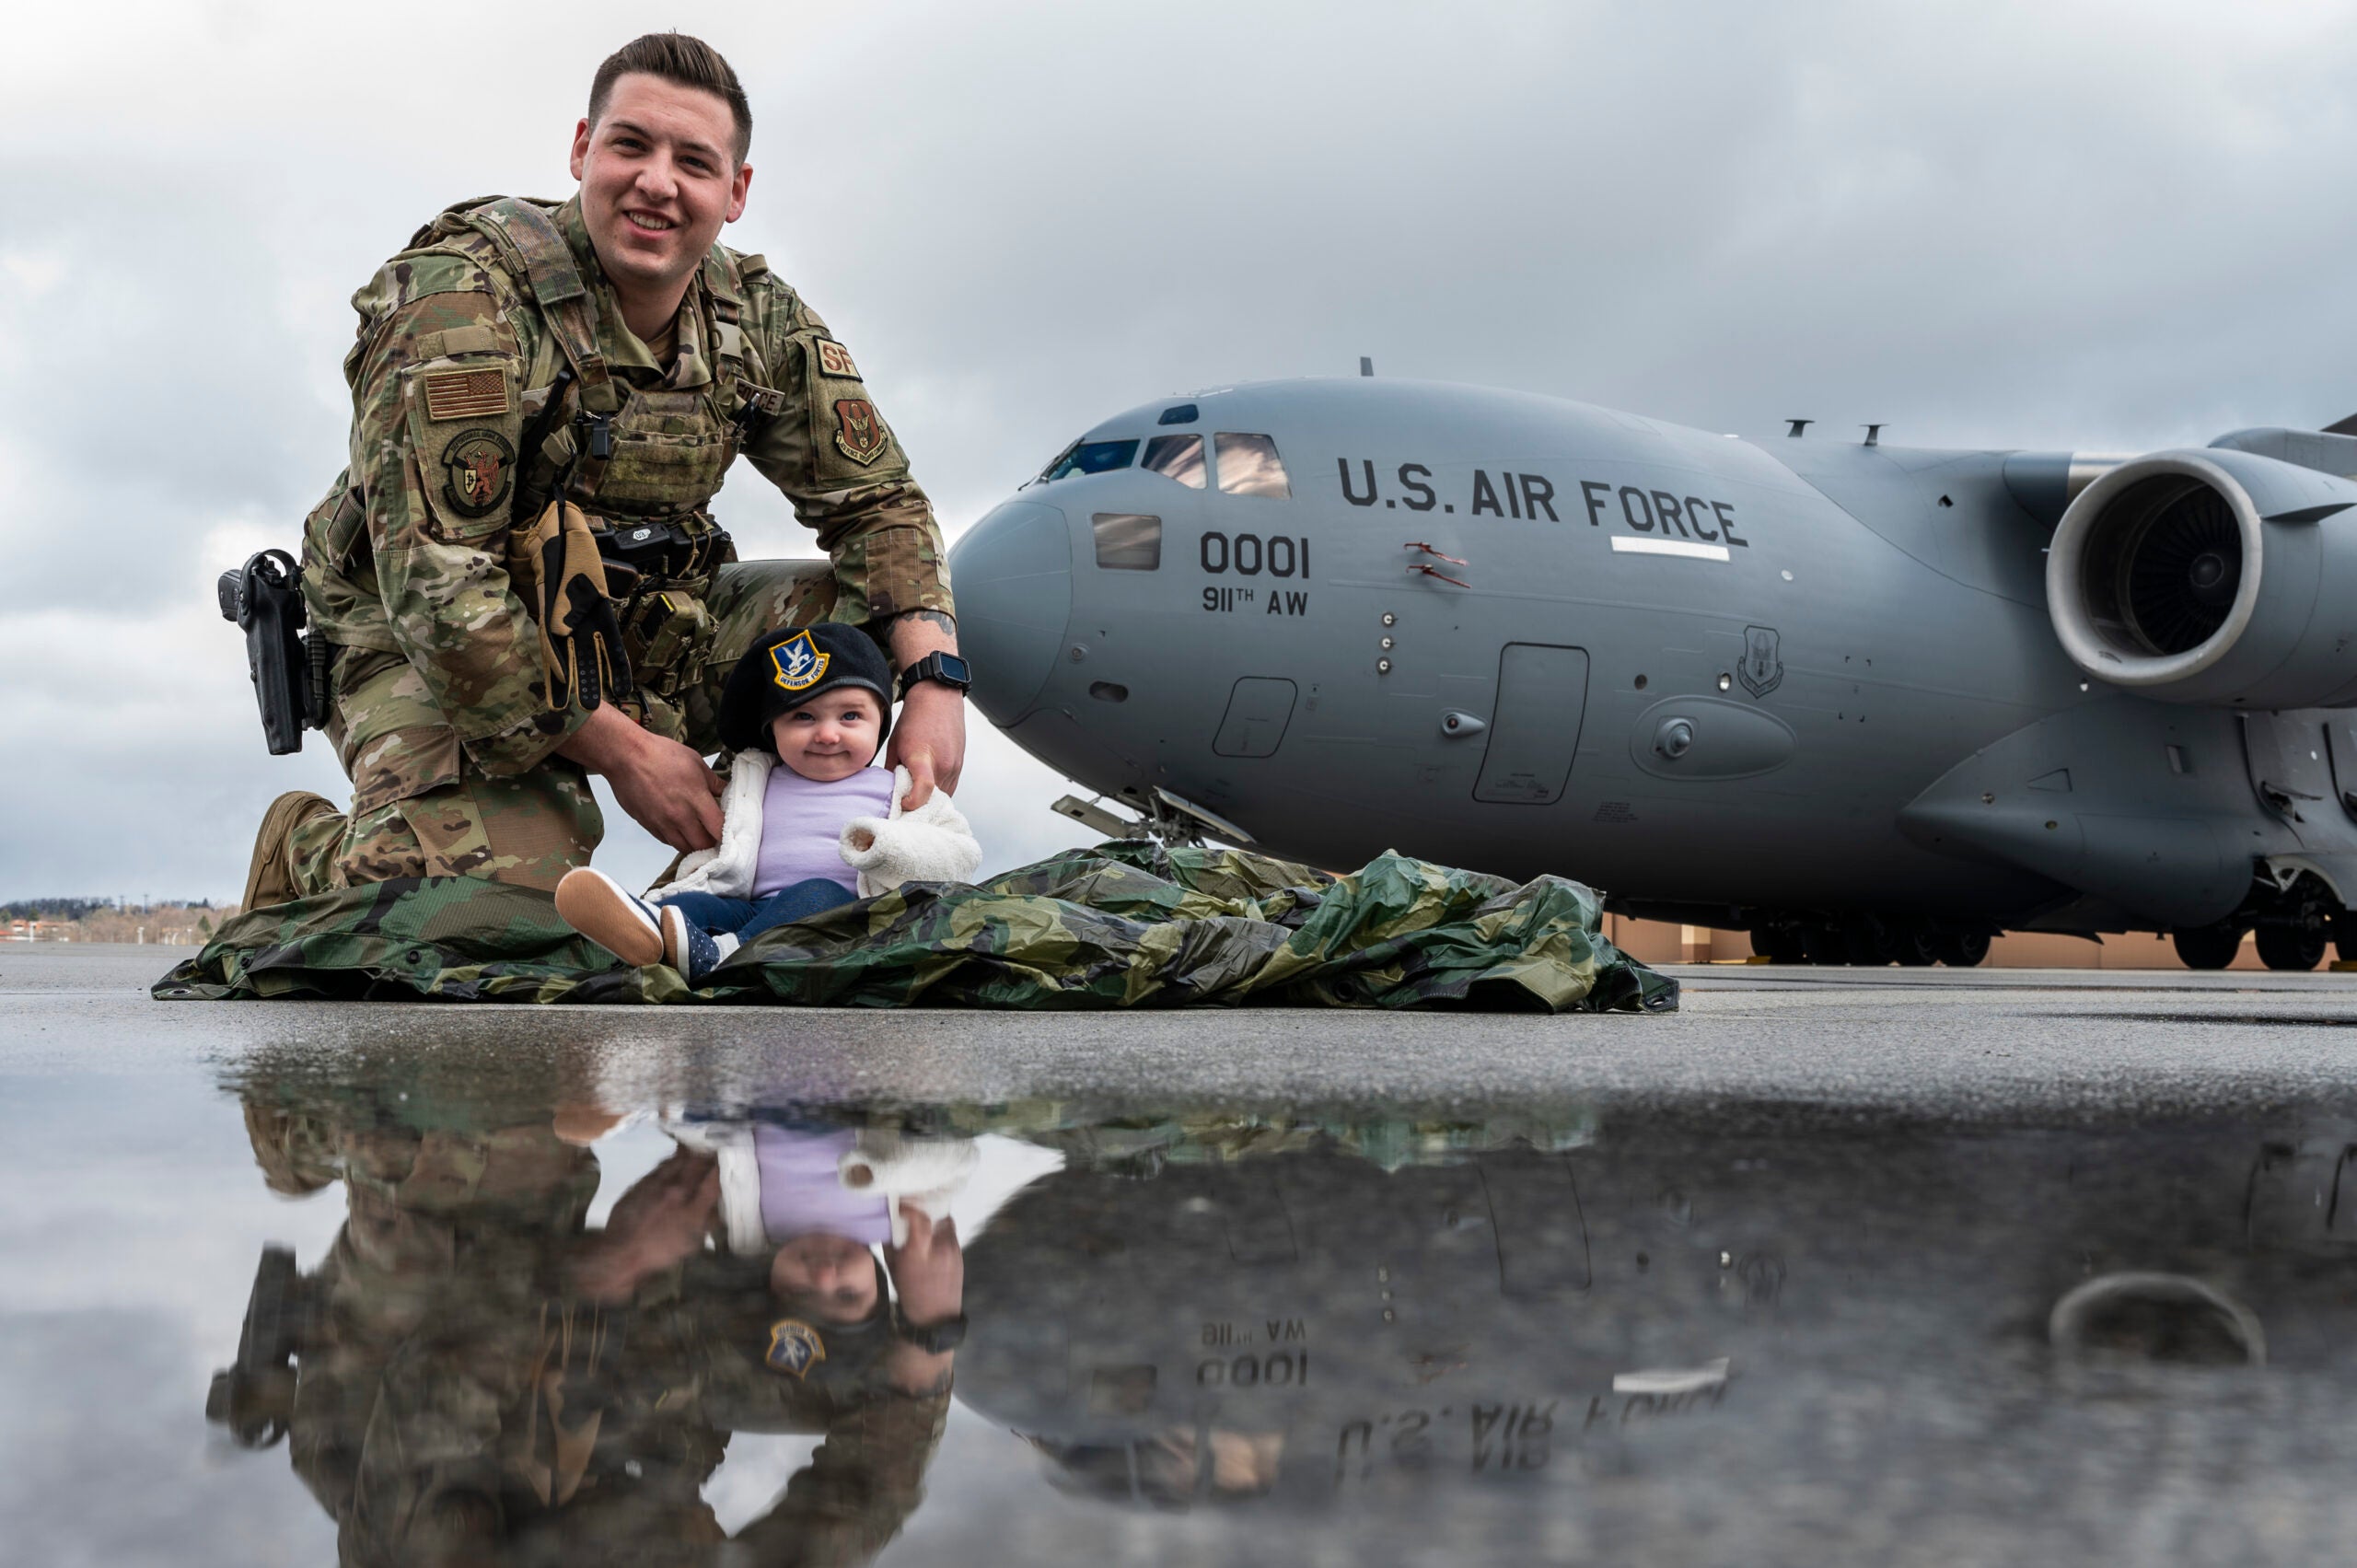 An Airman assigned to the 911th Security Forces Squadron poses for a photo with his daughter at the Pittsburgh International Airport Air Reserve Station, Pennsylvania, April 9, 2022. April is designated as the Month of the Military Child by the Department of Defense Education Activity and was established to underscore the important role children play in the Armed Forces community. (U.S. Air Force photo by Joshua J. Seybert)